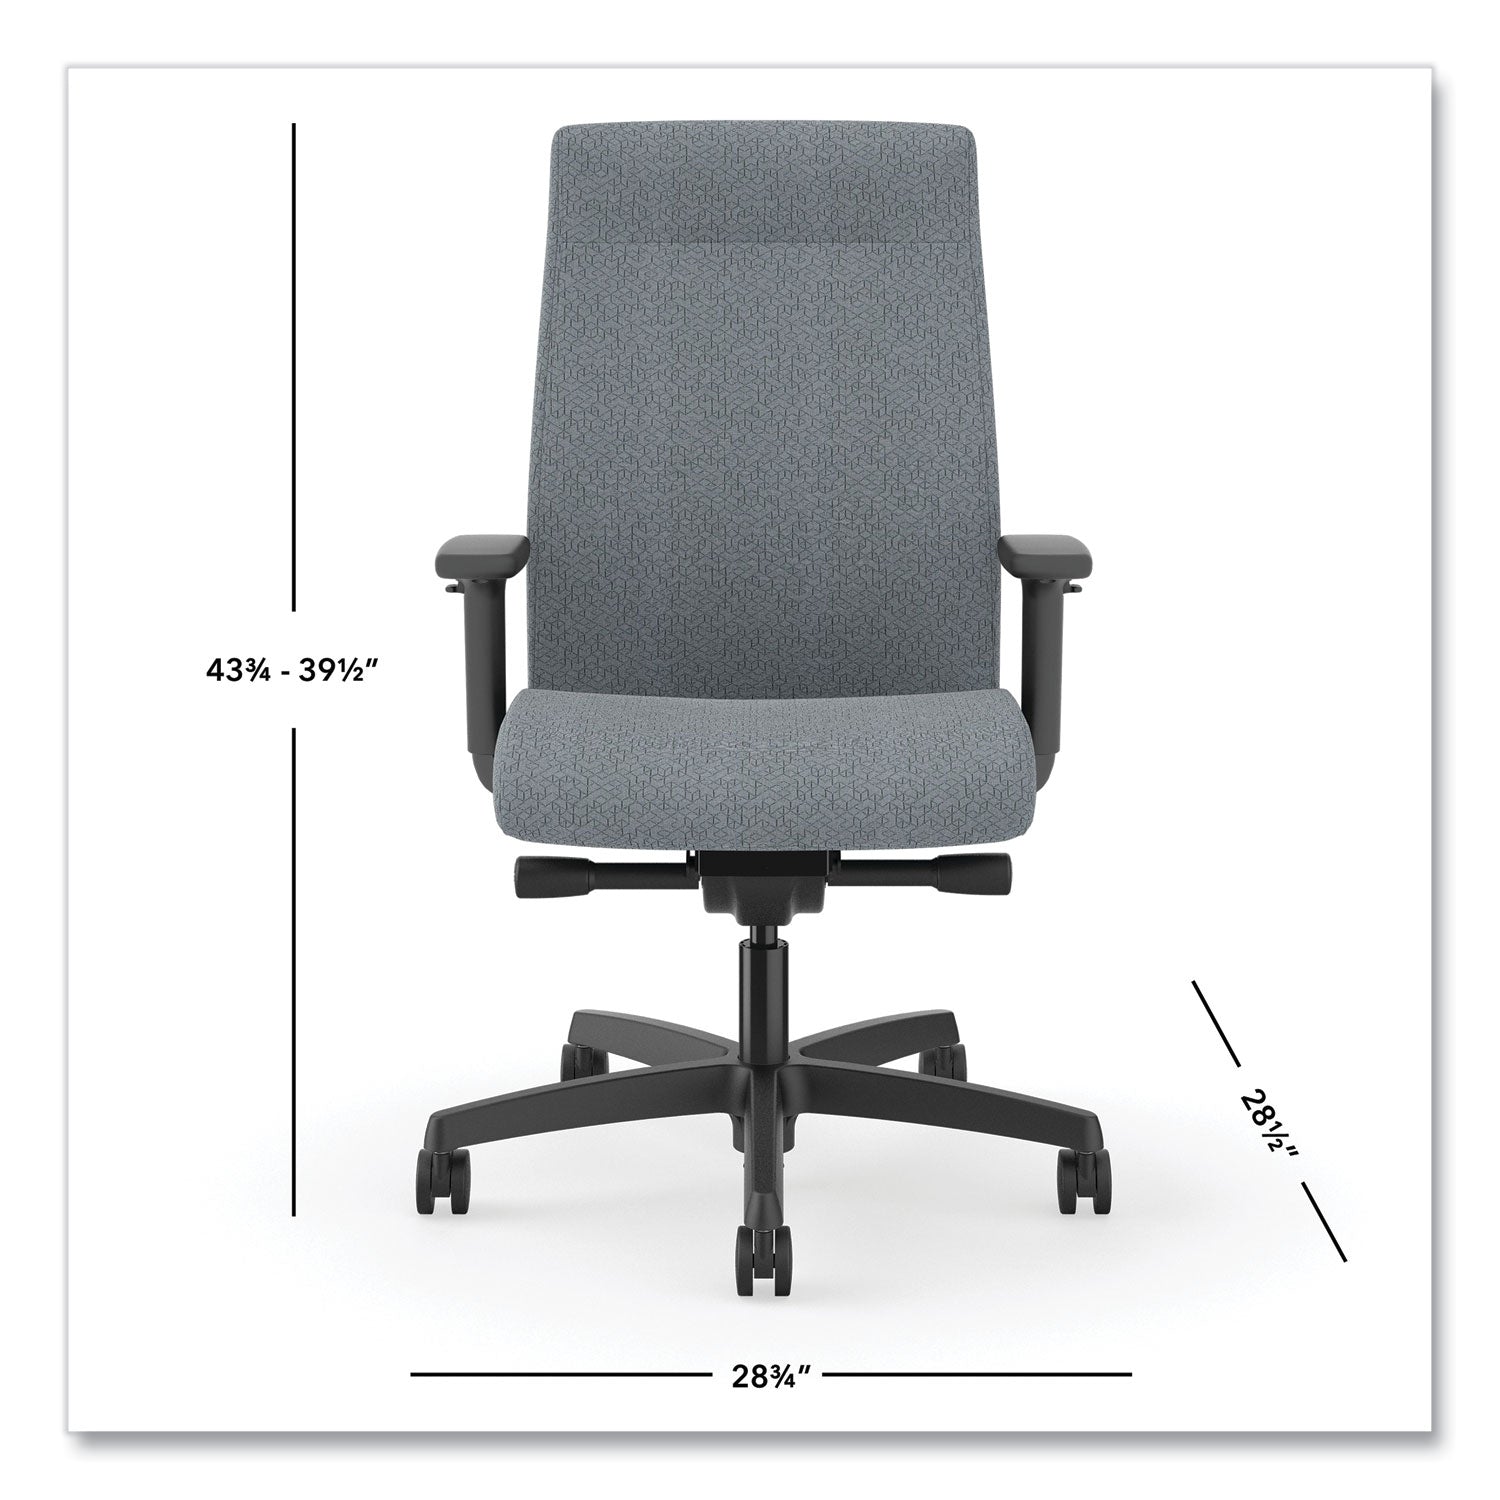 ignition-20-upholstered-mid-back-task-chair-17-to-2125-seat-height-basalt-fabric-seat-back-ships-in-7-10-business-days_honi2u2ahax25tk - 2